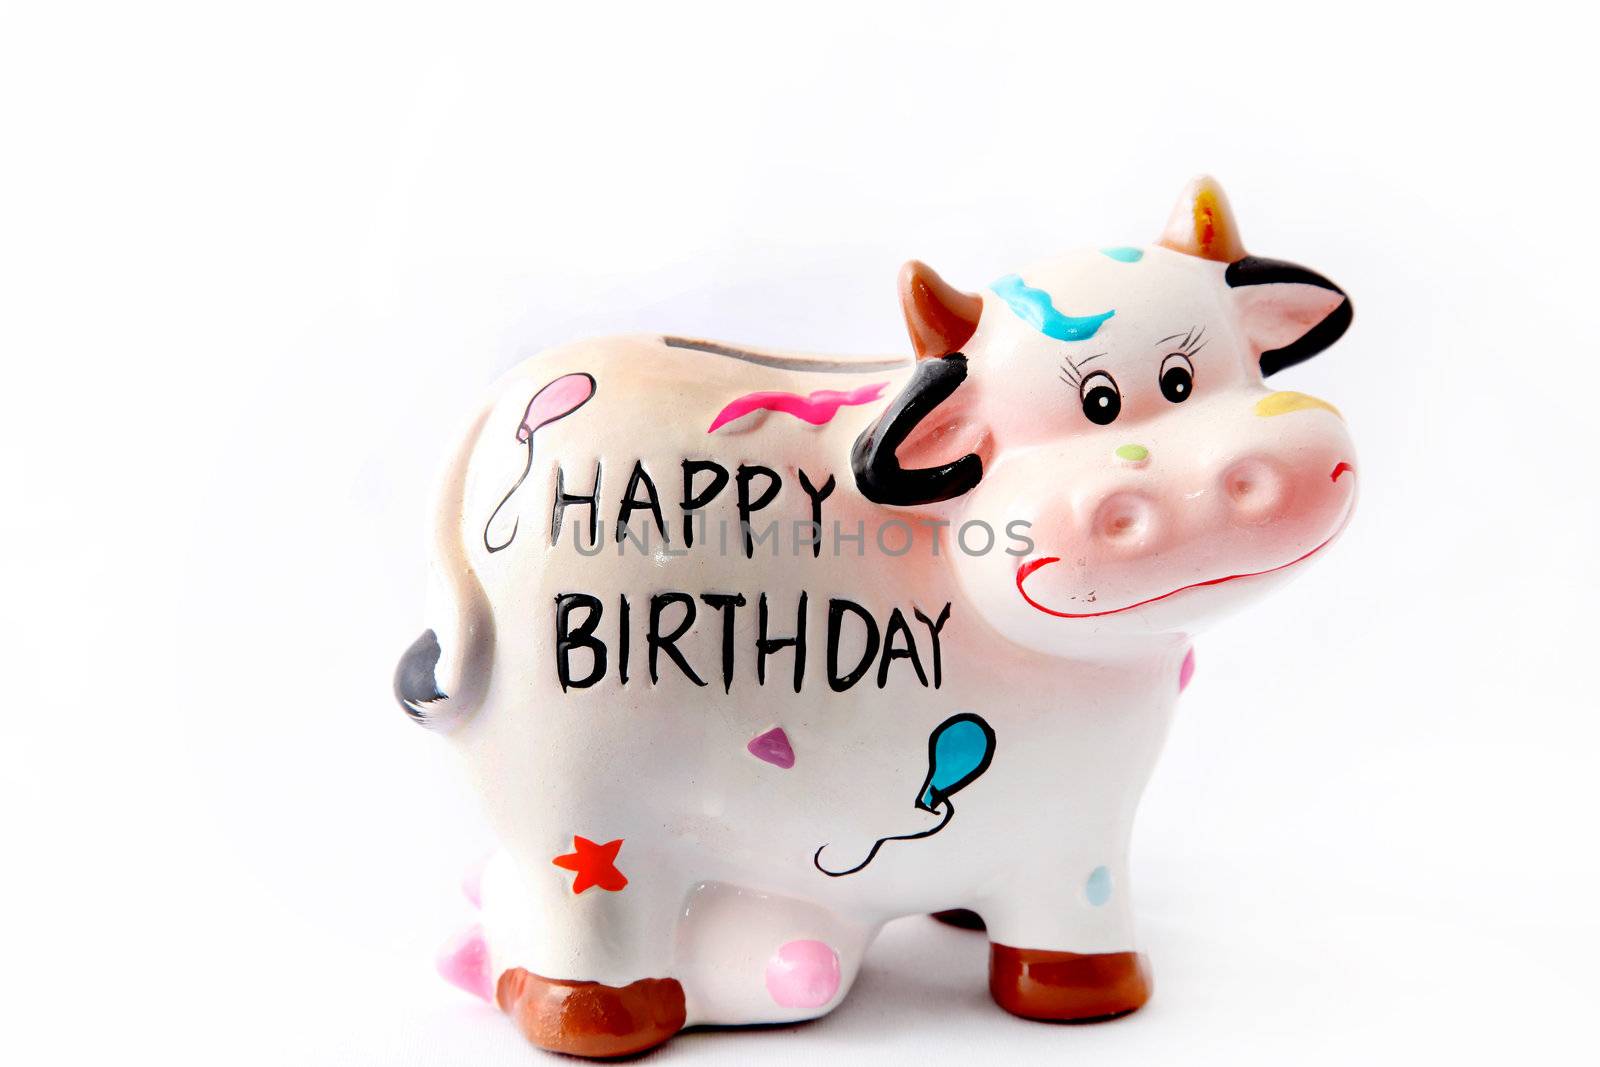 a cheerful brindled cow with the slogan "Happy Birthday" on his stomach